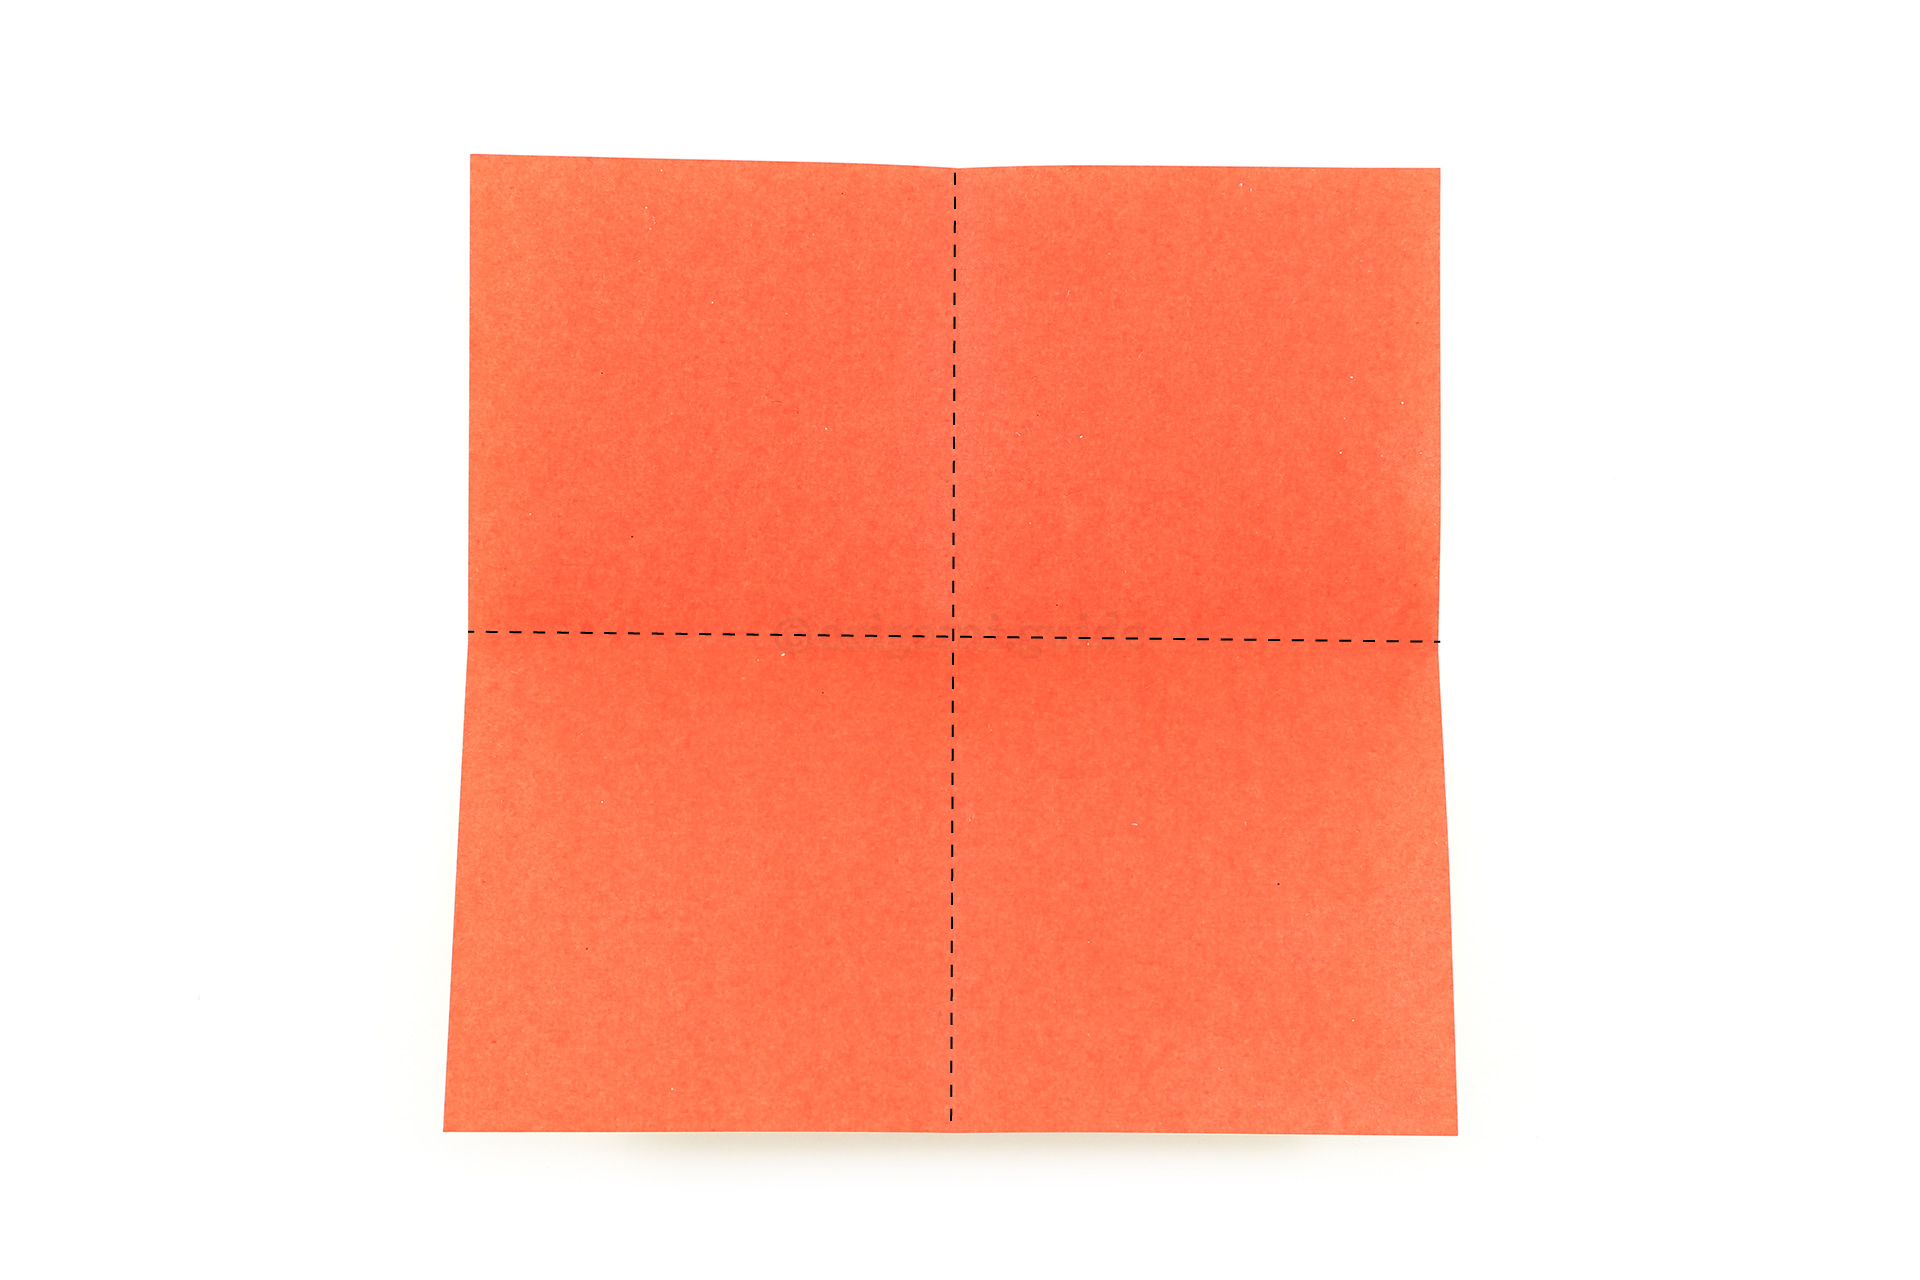 Fold the paper in half, from left to right. Then rotate the paper and repeat.